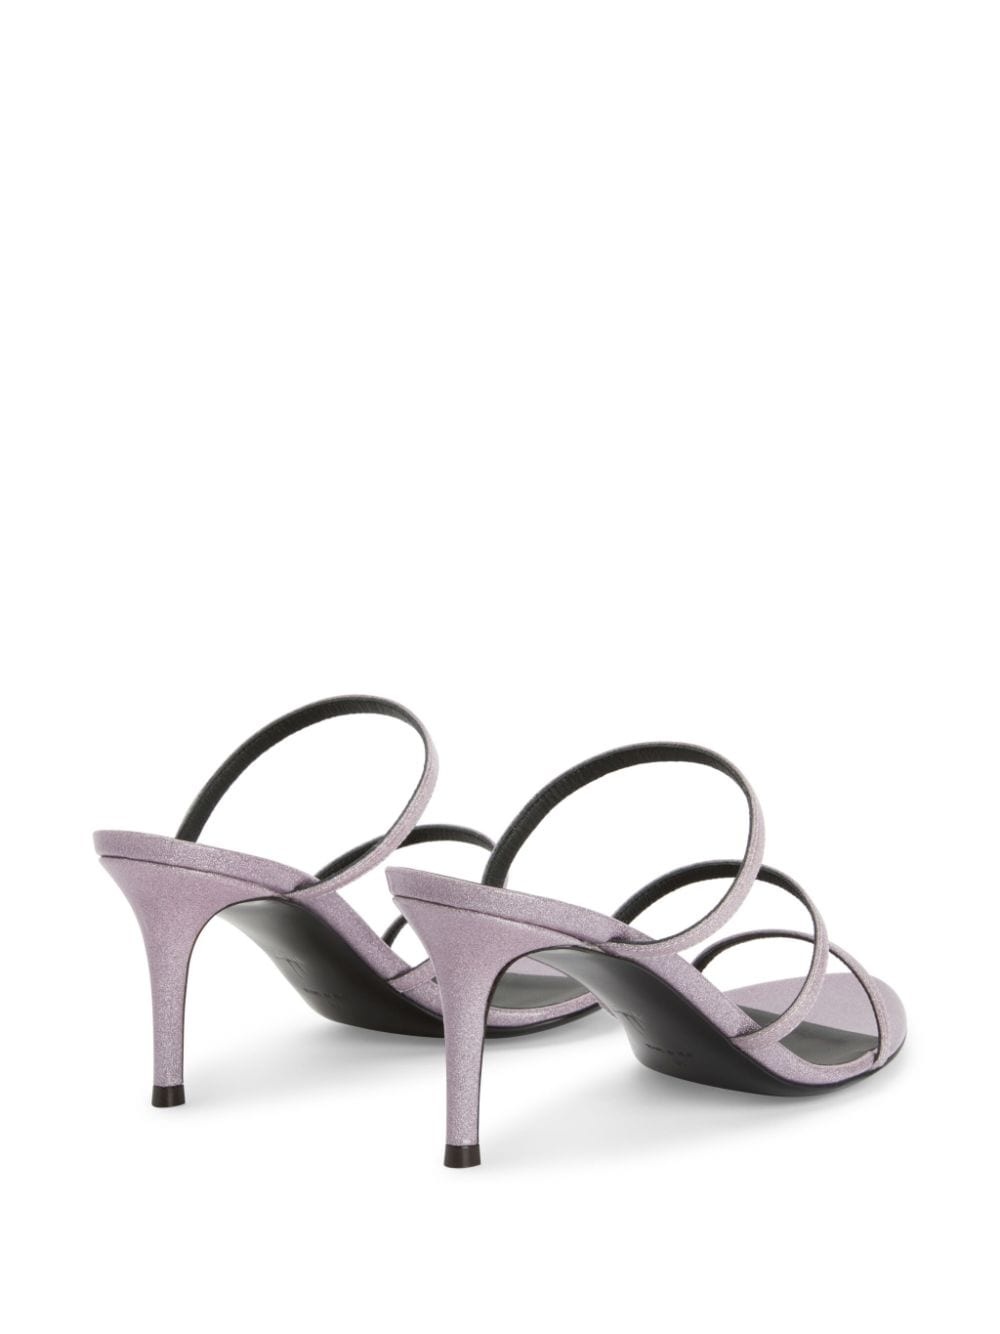 Alimha 70mm strappy sandals - 3